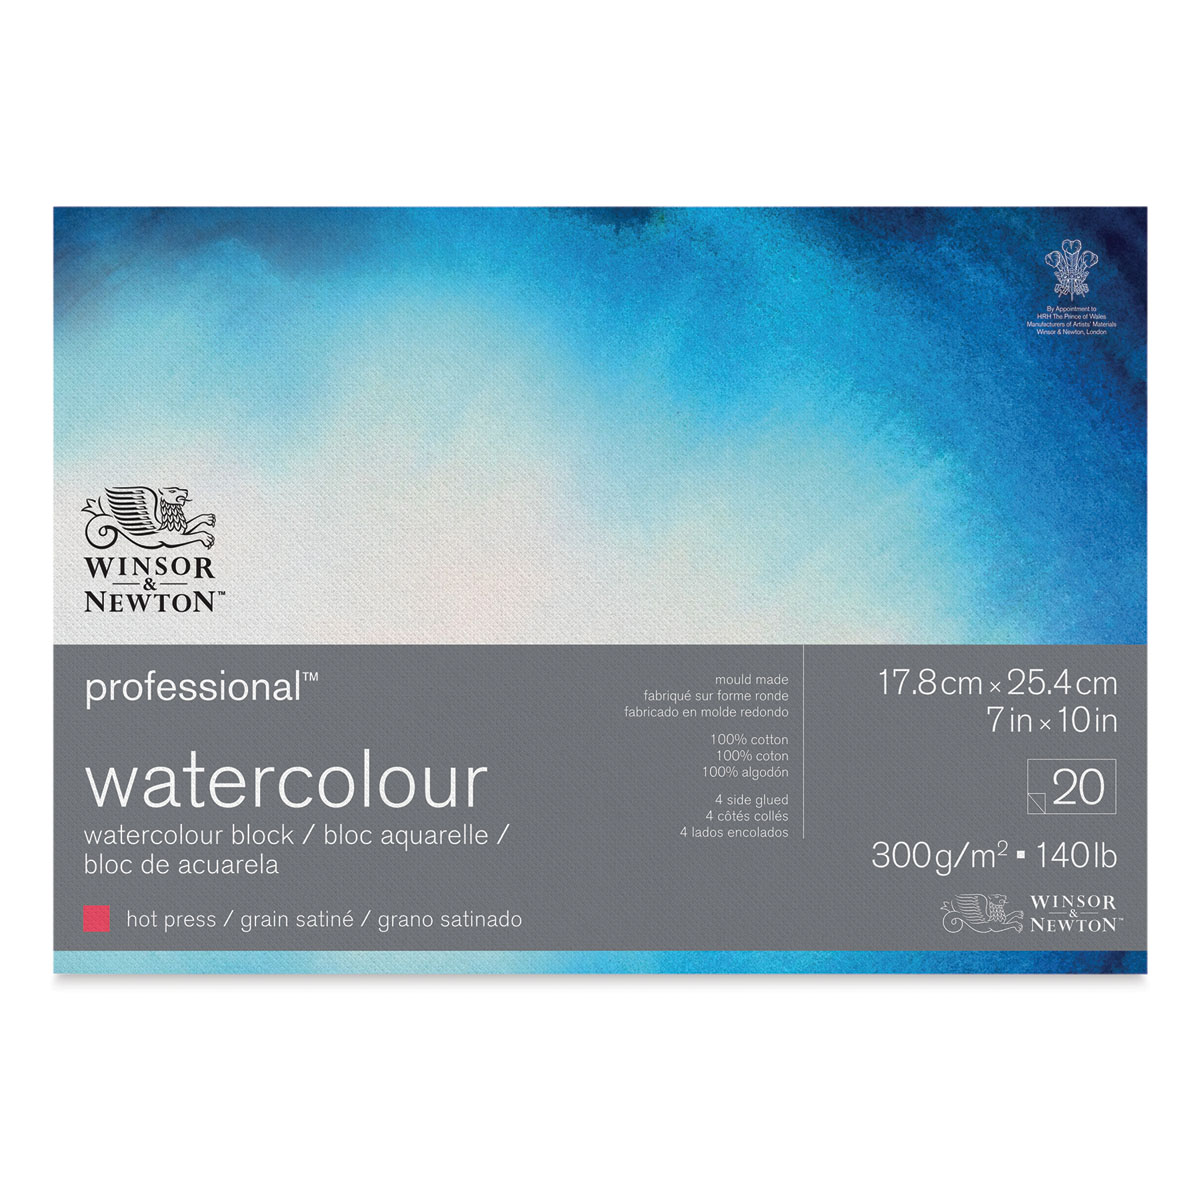 Winsor & Newton products for sale